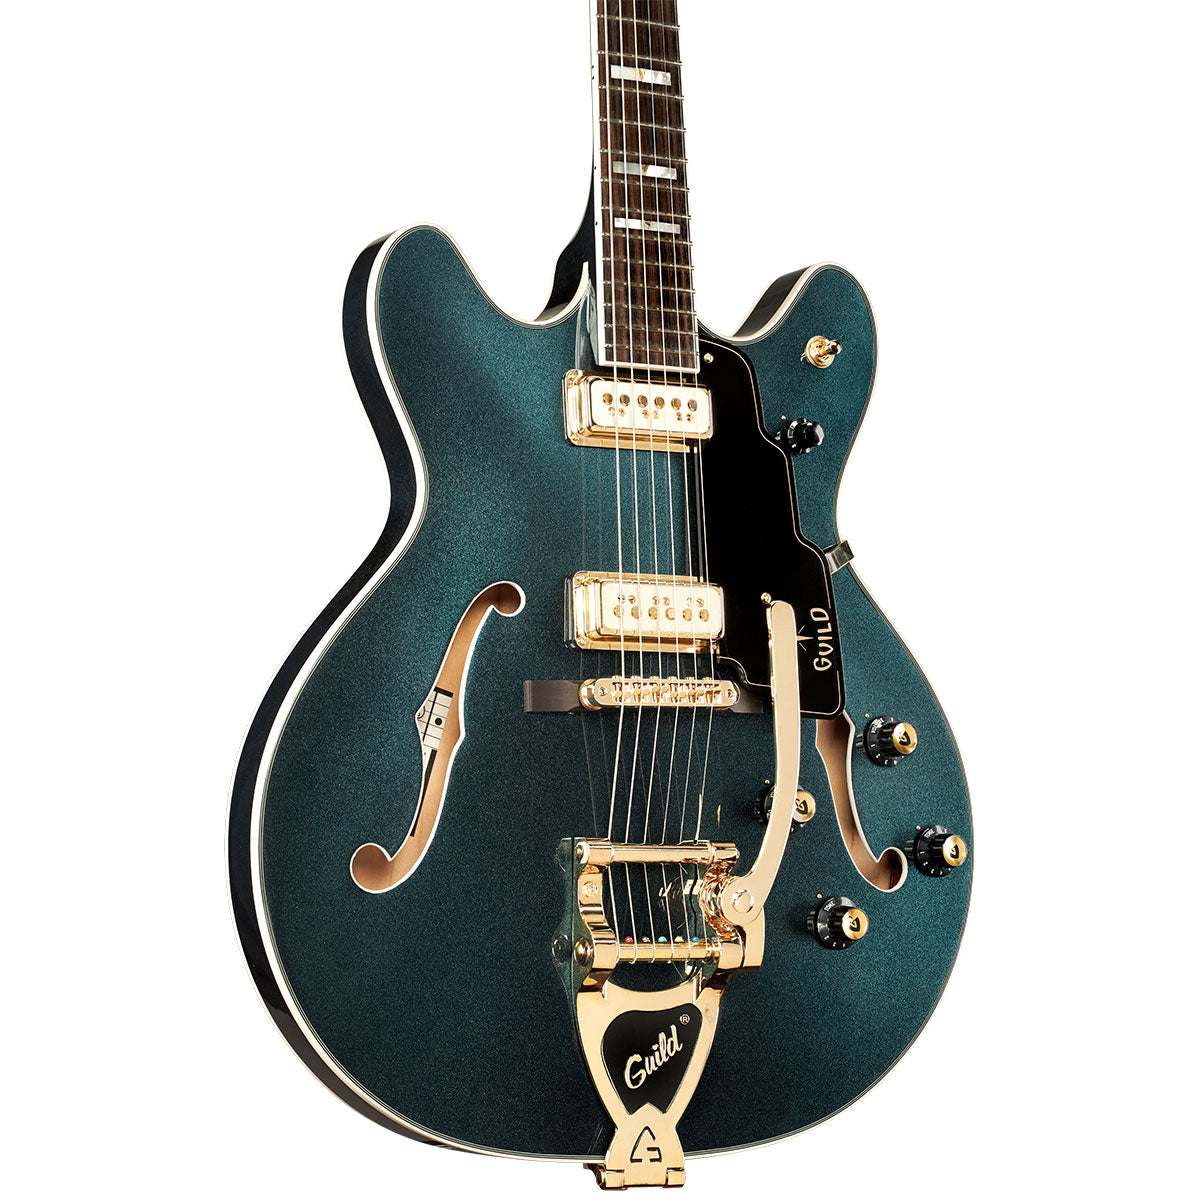 Guild Starfire VI Special Semi-hollowbody Electric Guitar - Kingswood Green